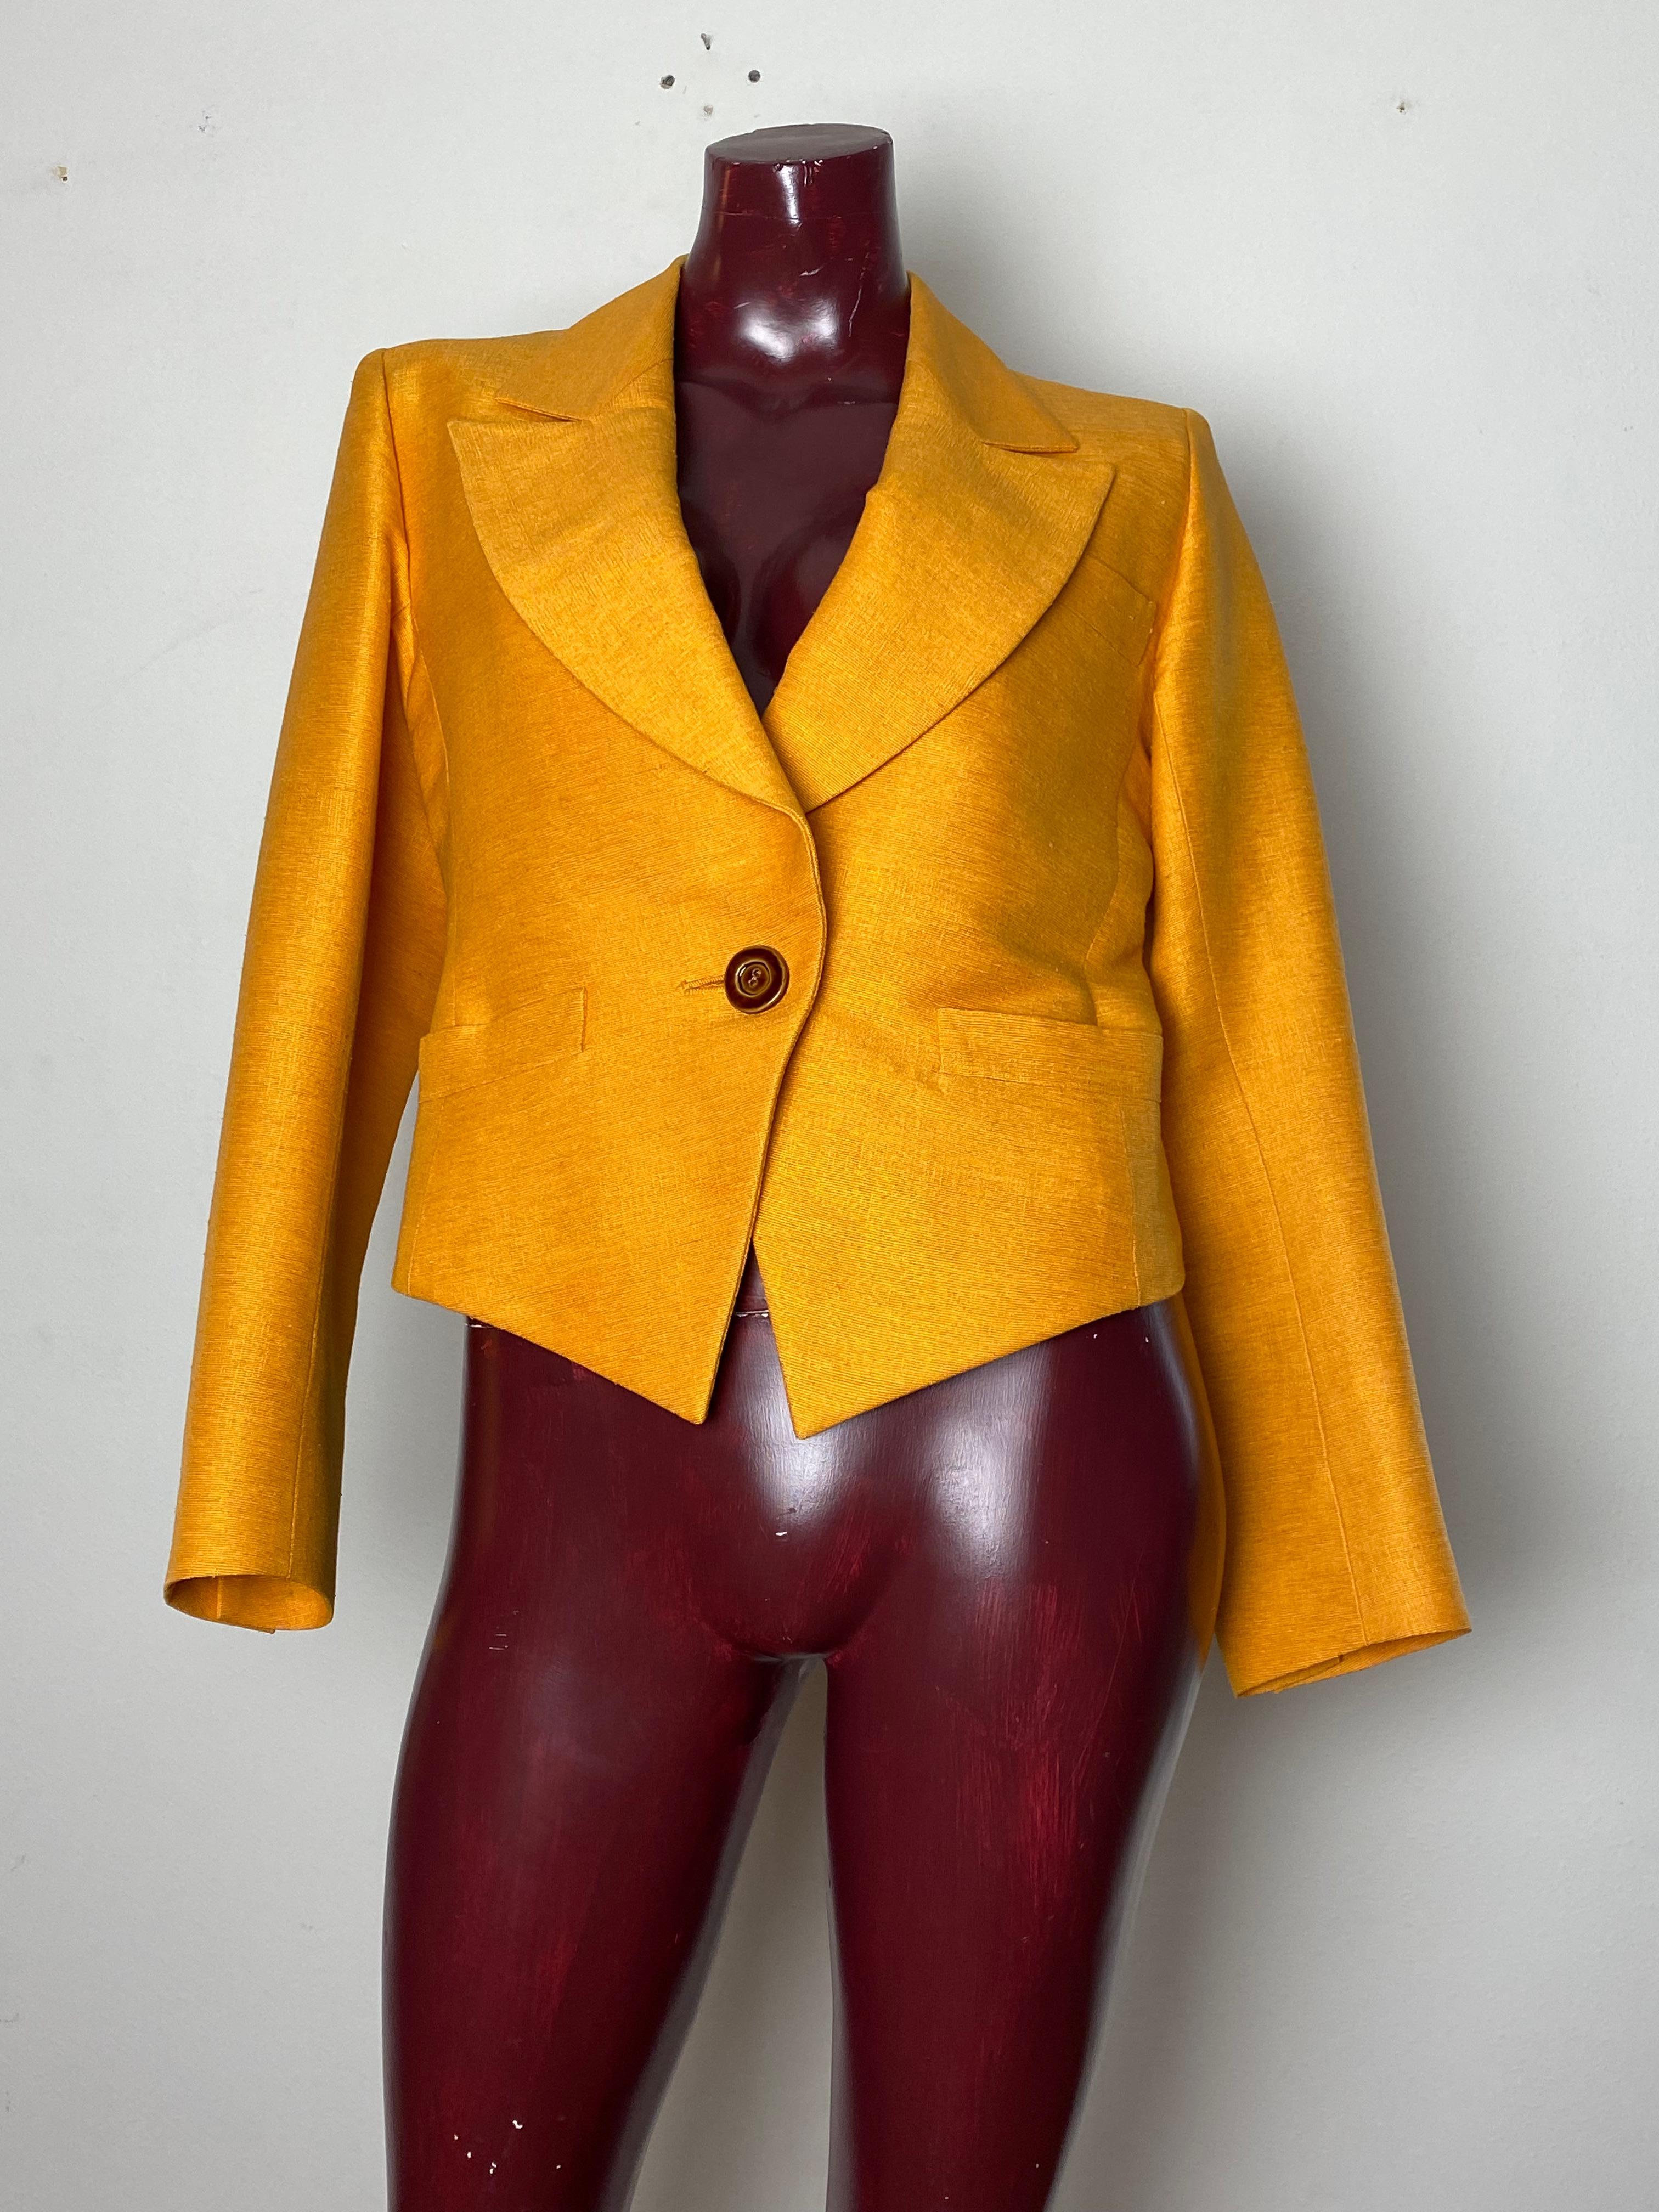 Vintage yellow single-button blazer with longer front points and lapel collar.
in very good condition YSL Rive Gauche silk cotton goes well with any outfit giving a touch of class .
Good vestibiity size unfortunately missing we think a French 36 as